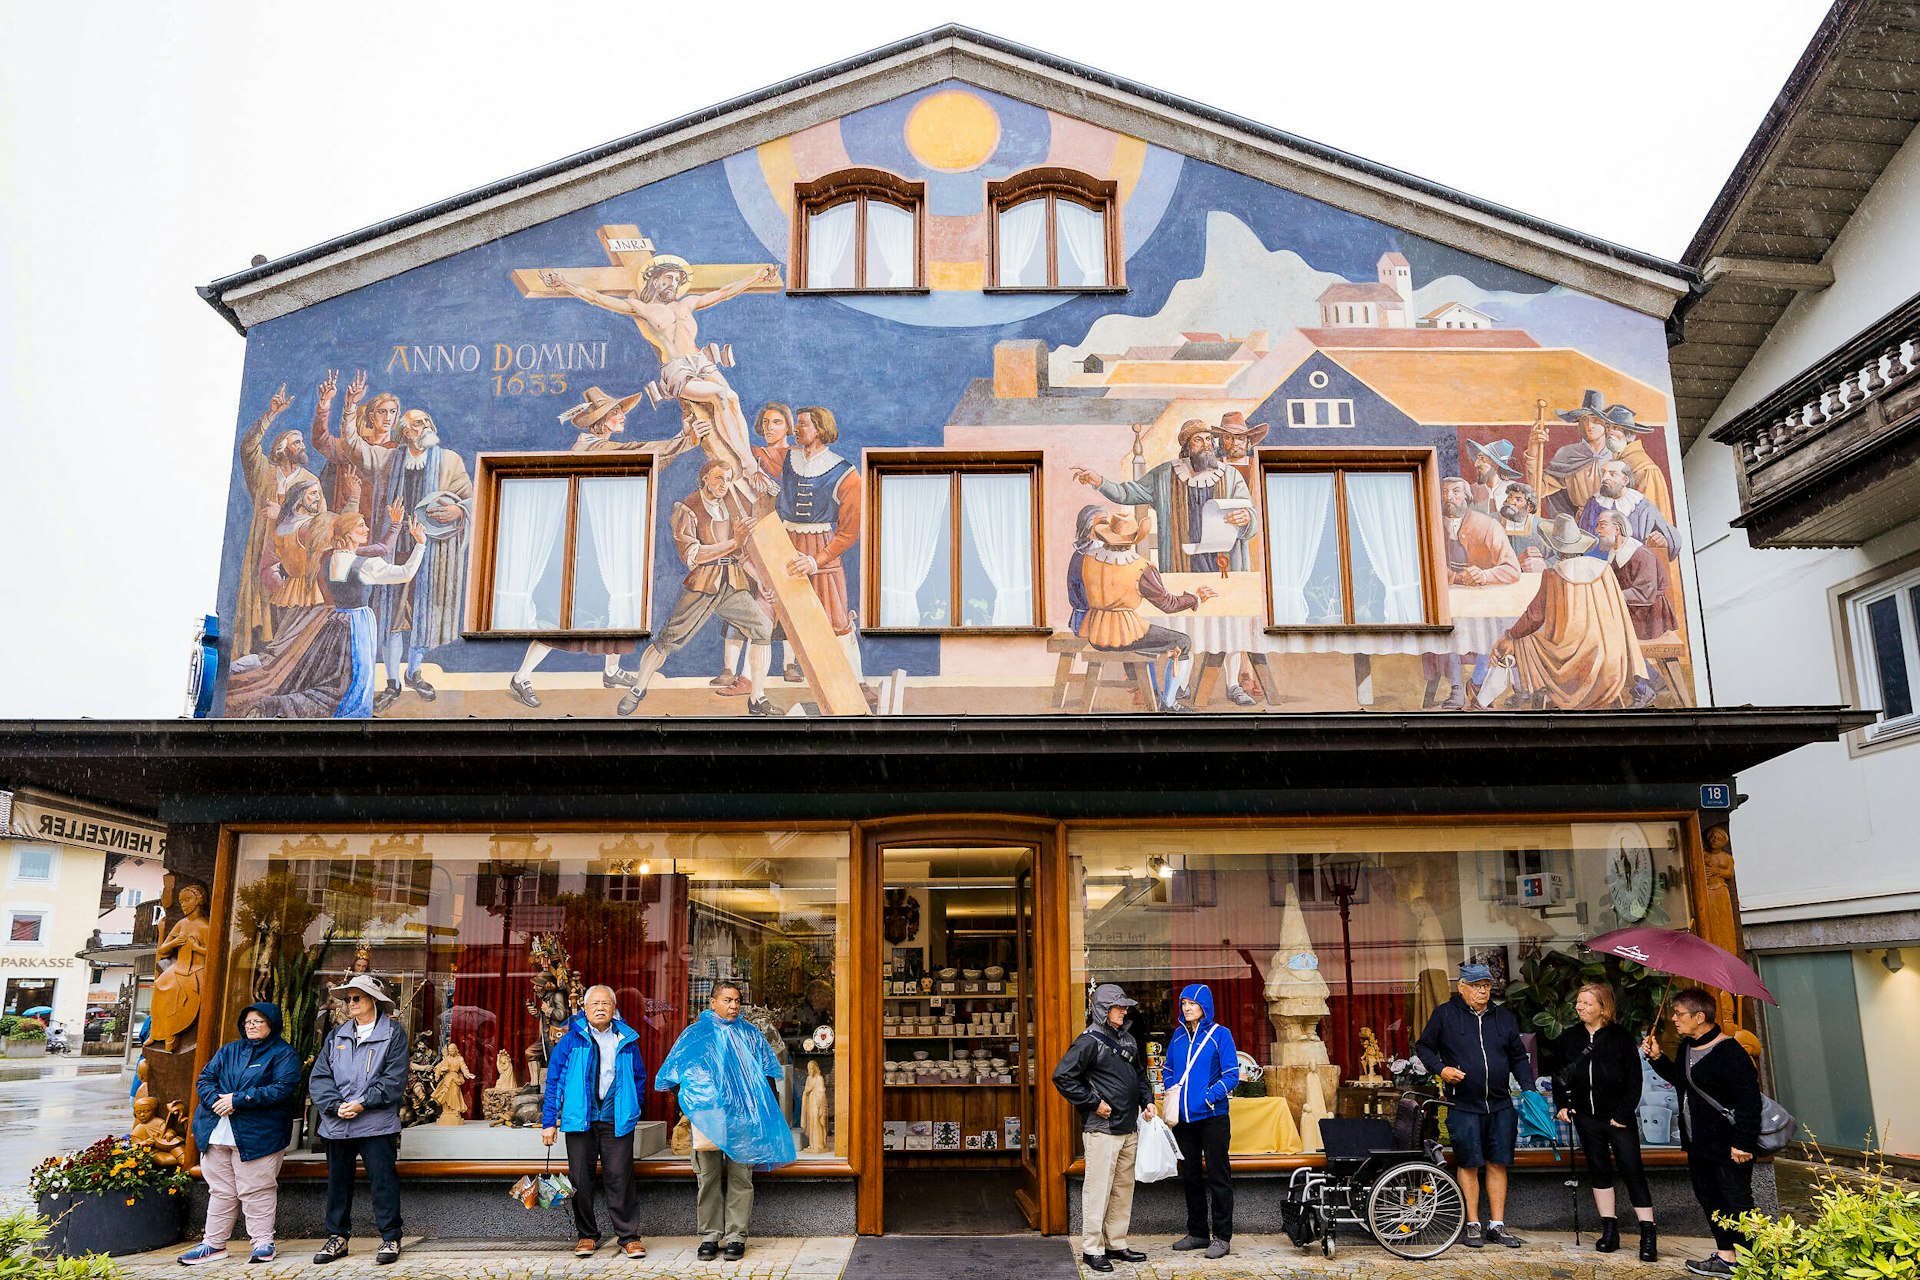 Tourists hide from the rain under the awning of a building with a painted fresco of the village's historic Passion Play 